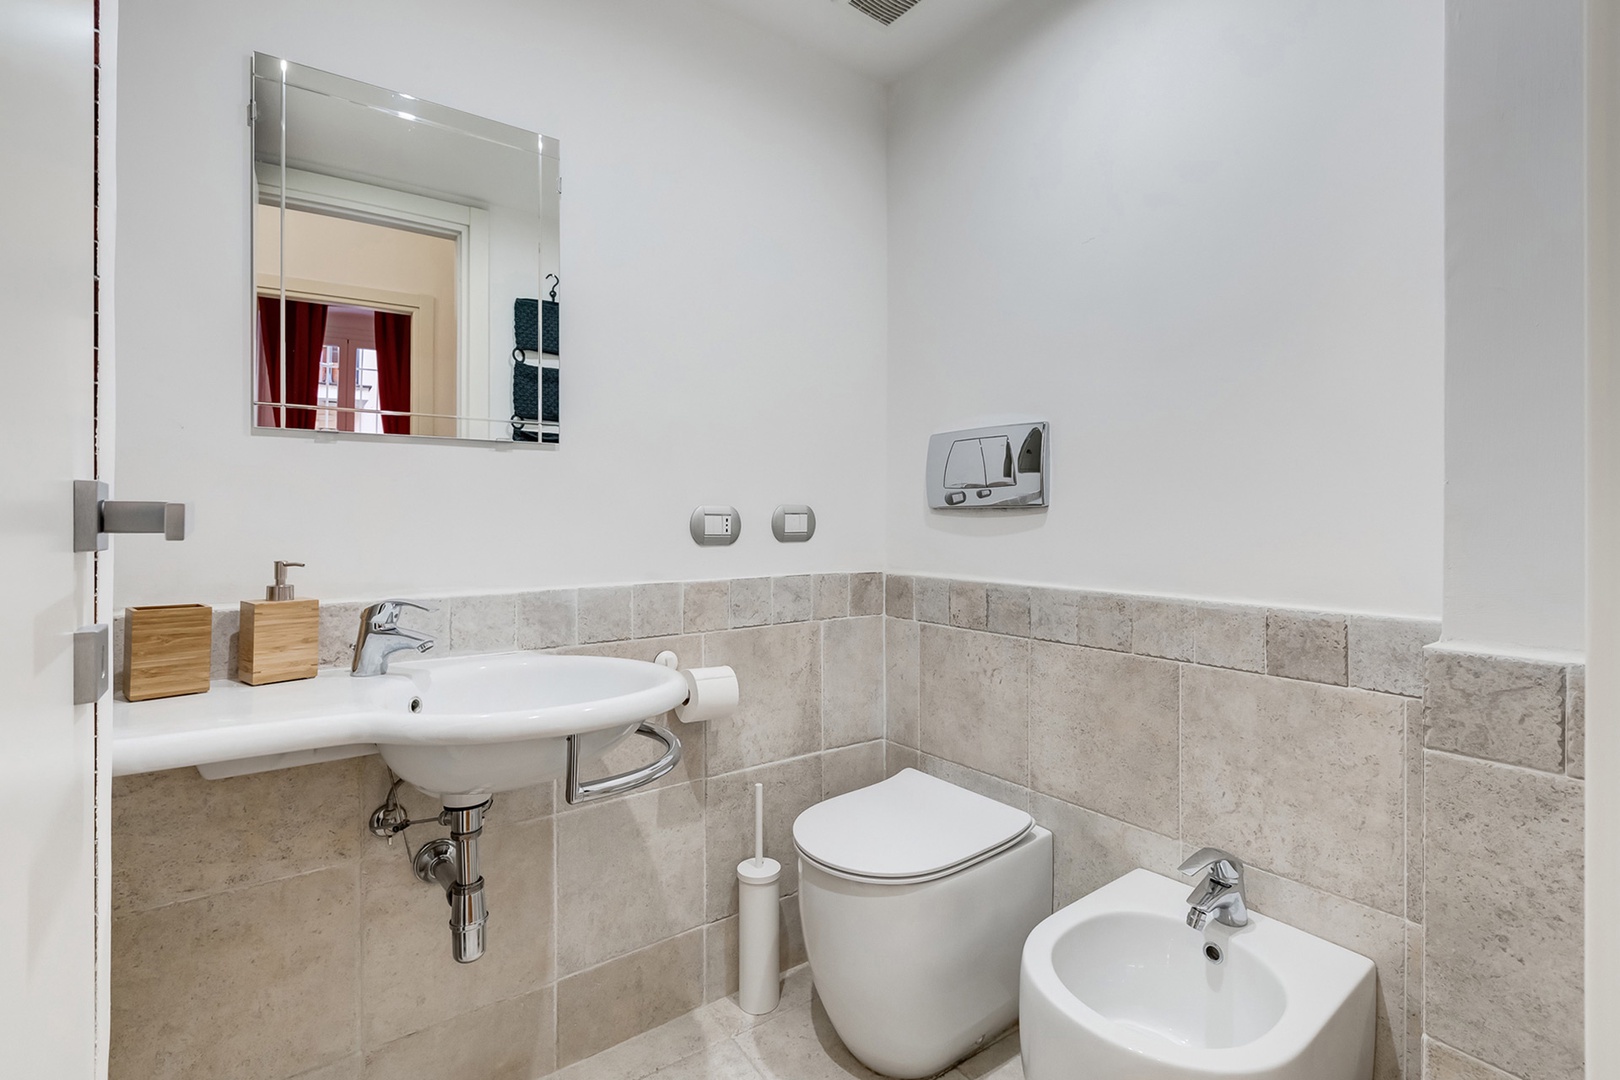 Full bathroom with shower, sink and toilet